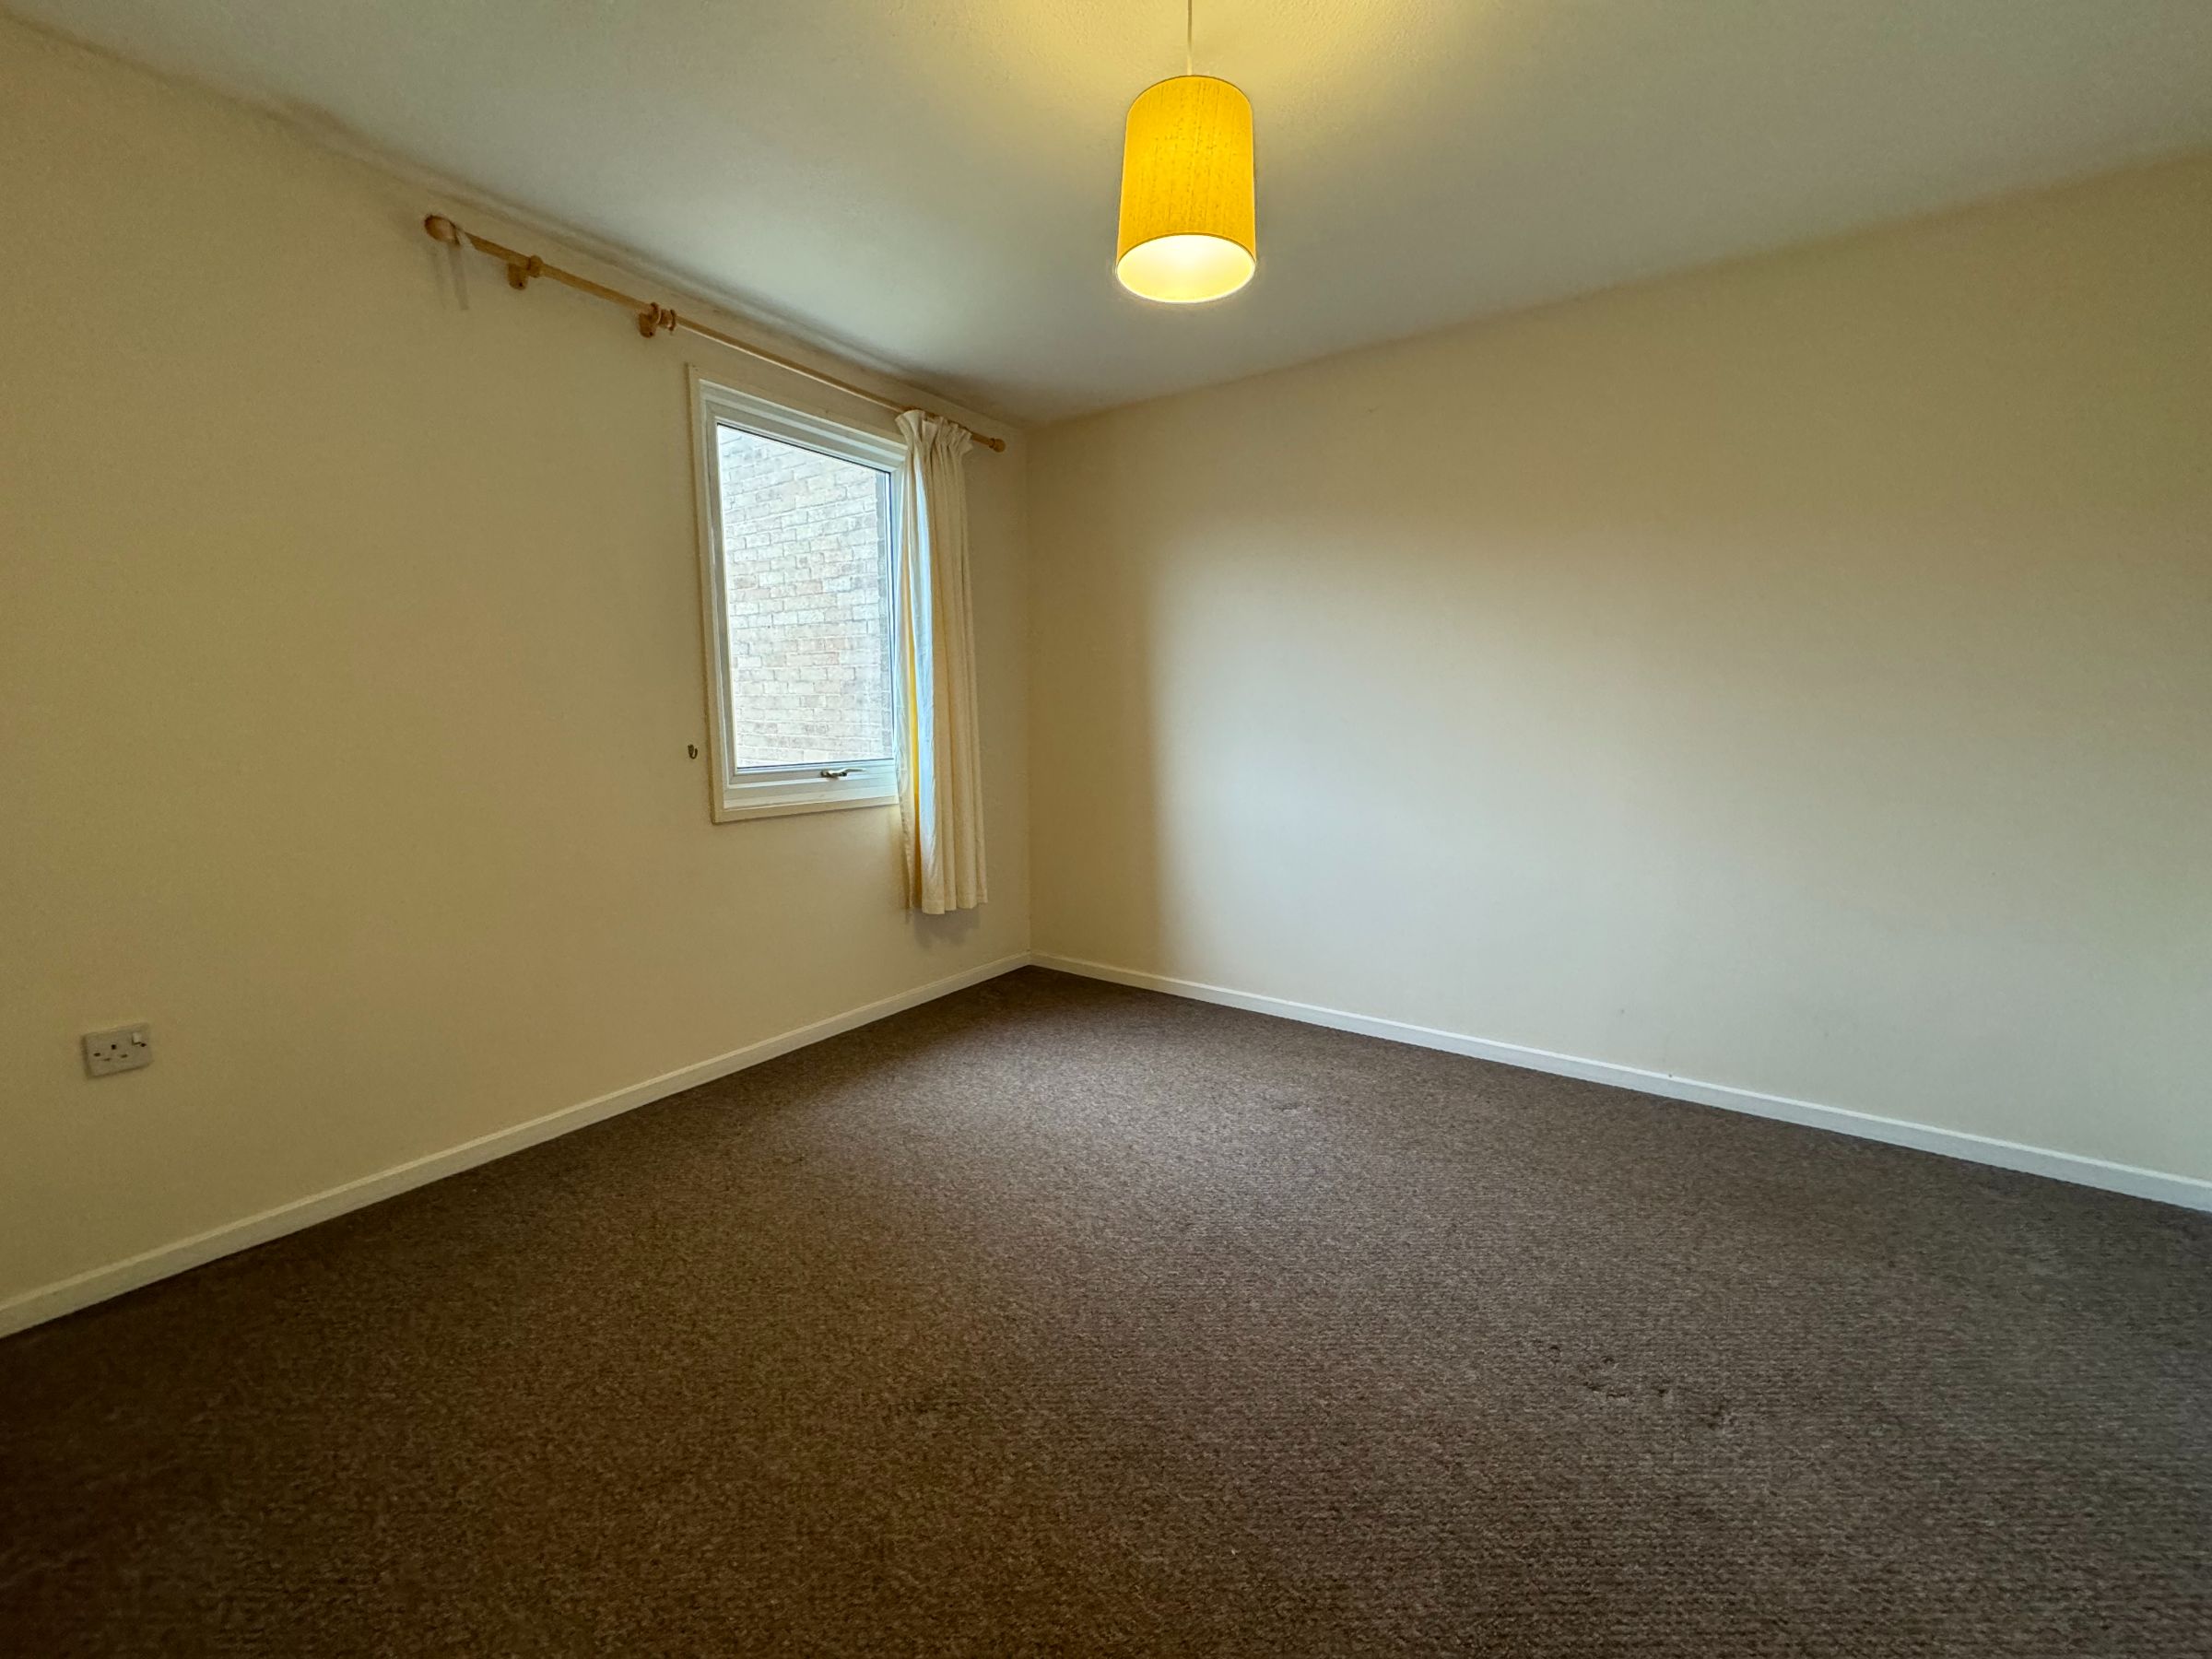 3 bed terraced house for sale in Manton, Peterborough  - Property Image 6